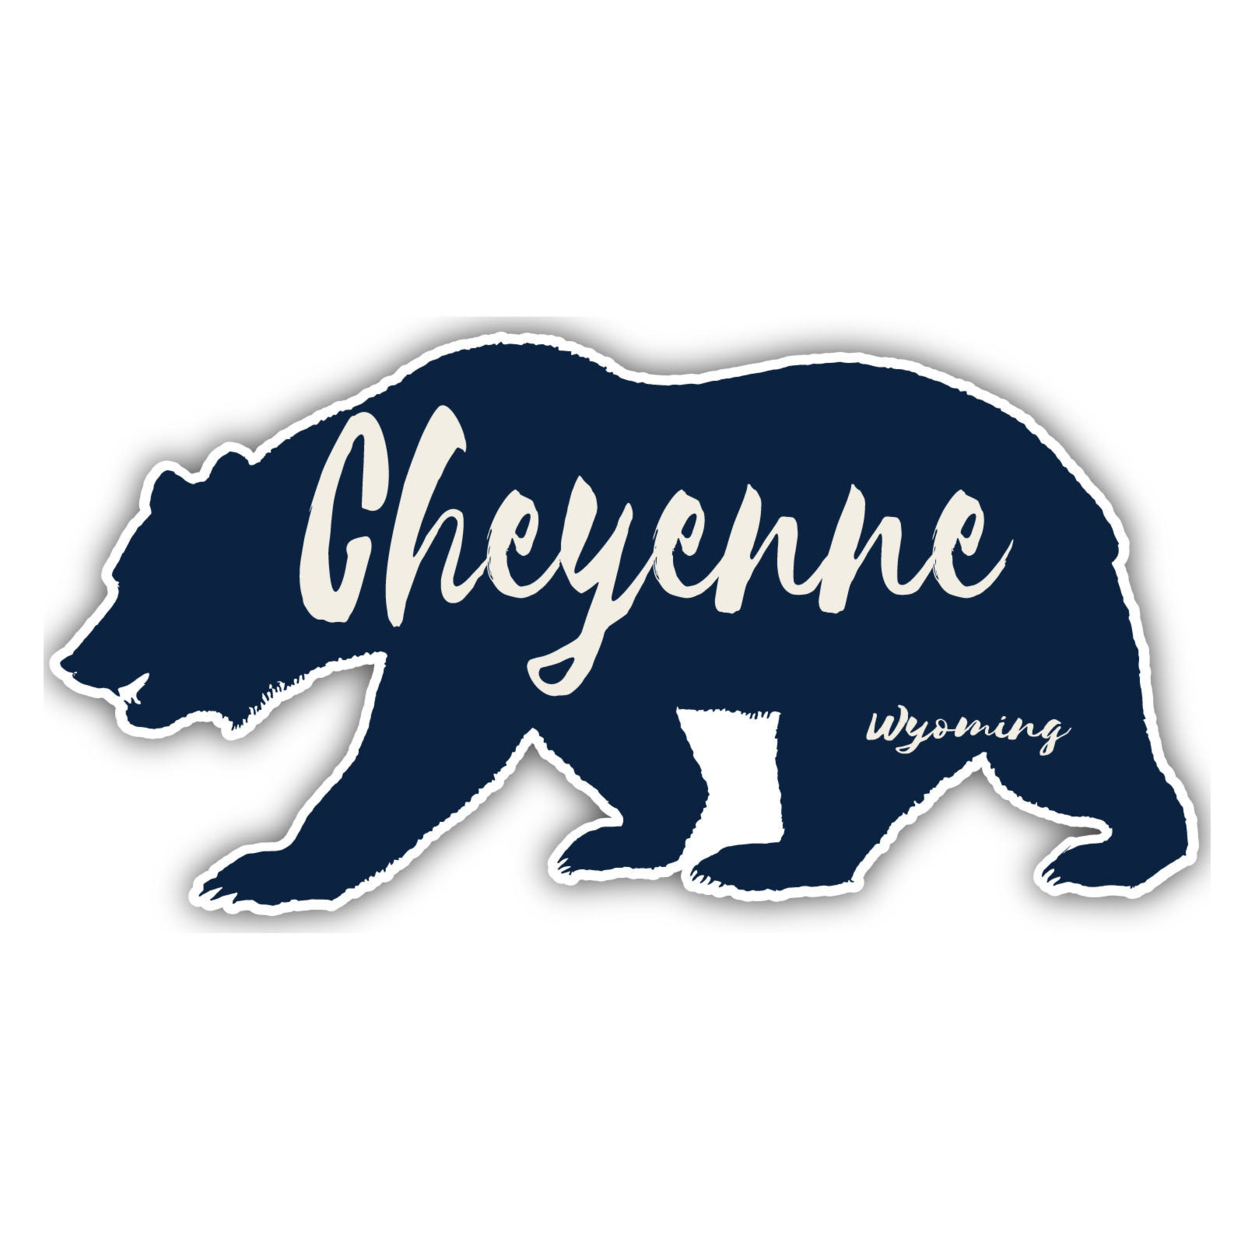 Cheyenne Wyoming Souvenir Decorative Stickers (Choose Theme And Size) - 4-Pack, 8-Inch, Bear